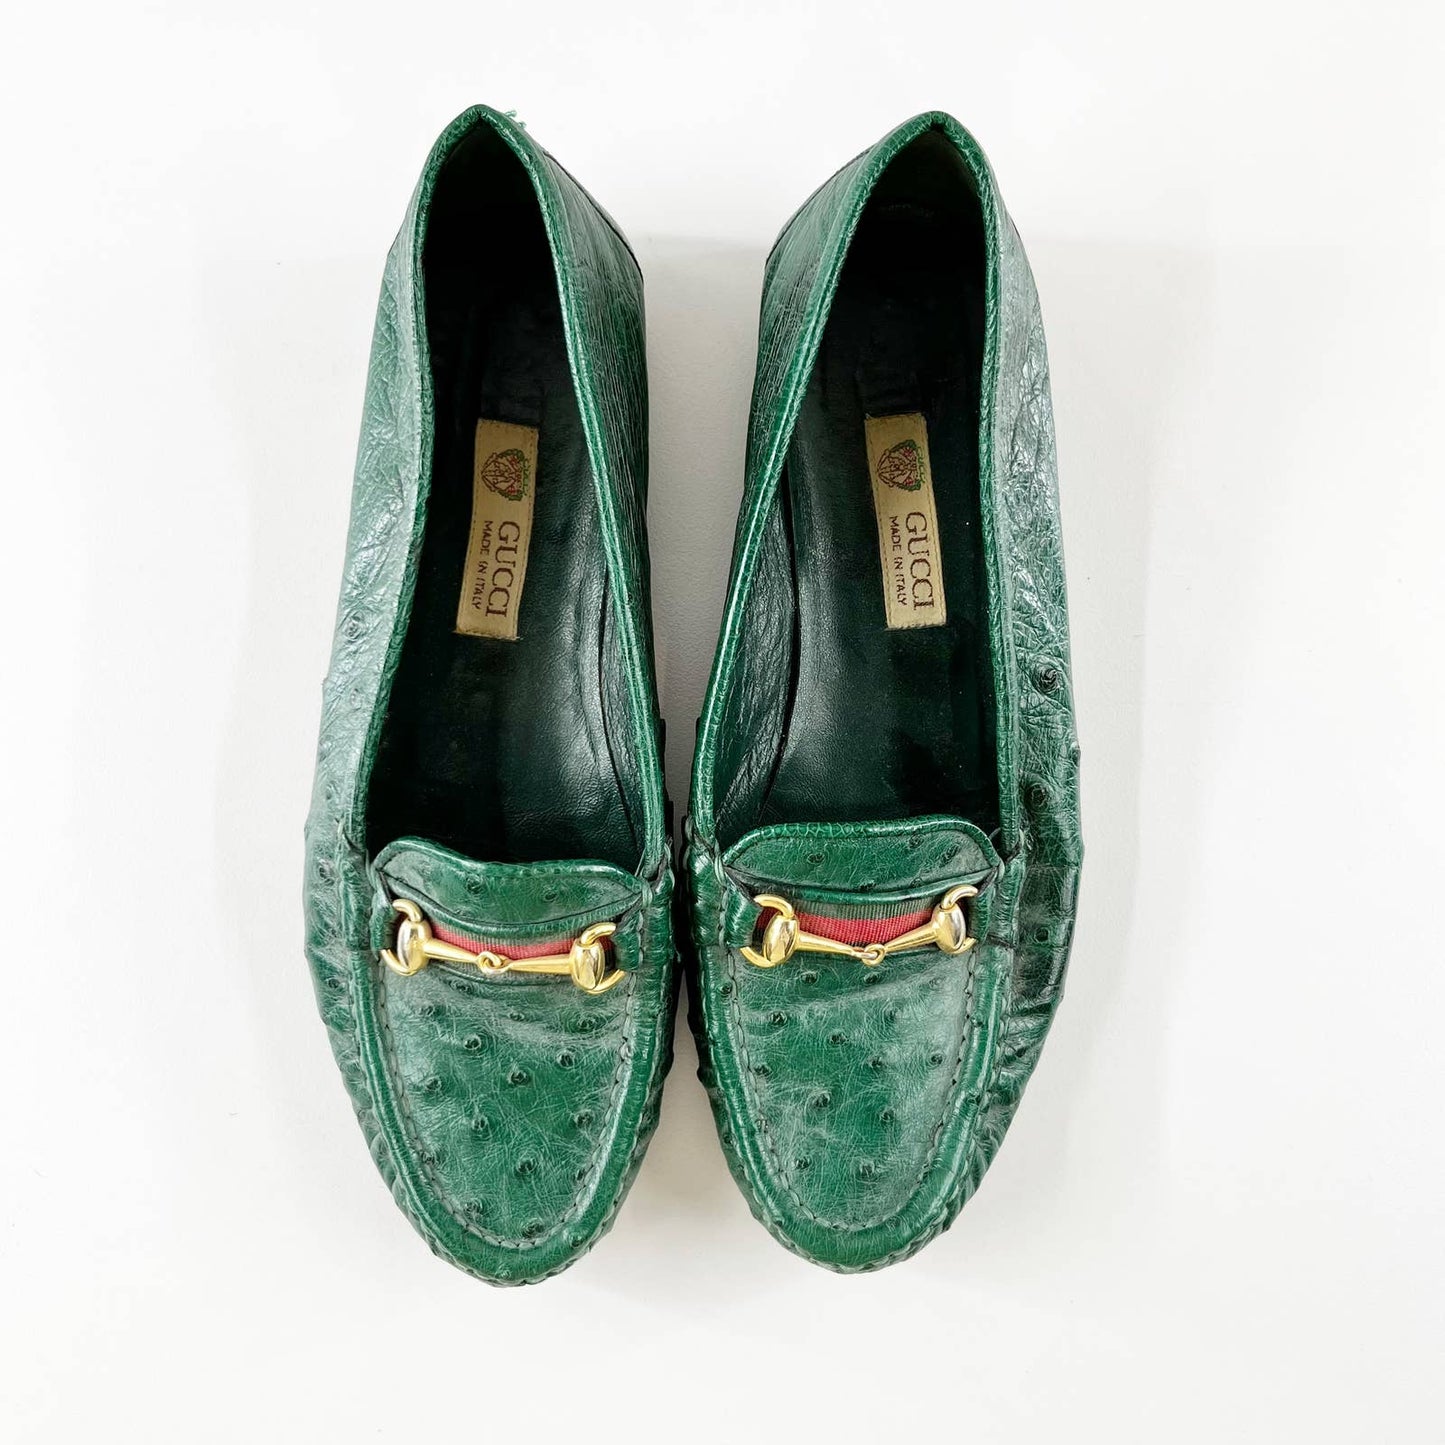 Gucci Vintage Horsebit Ostrich Leather Driving Loafers Flats Green 36 / 6